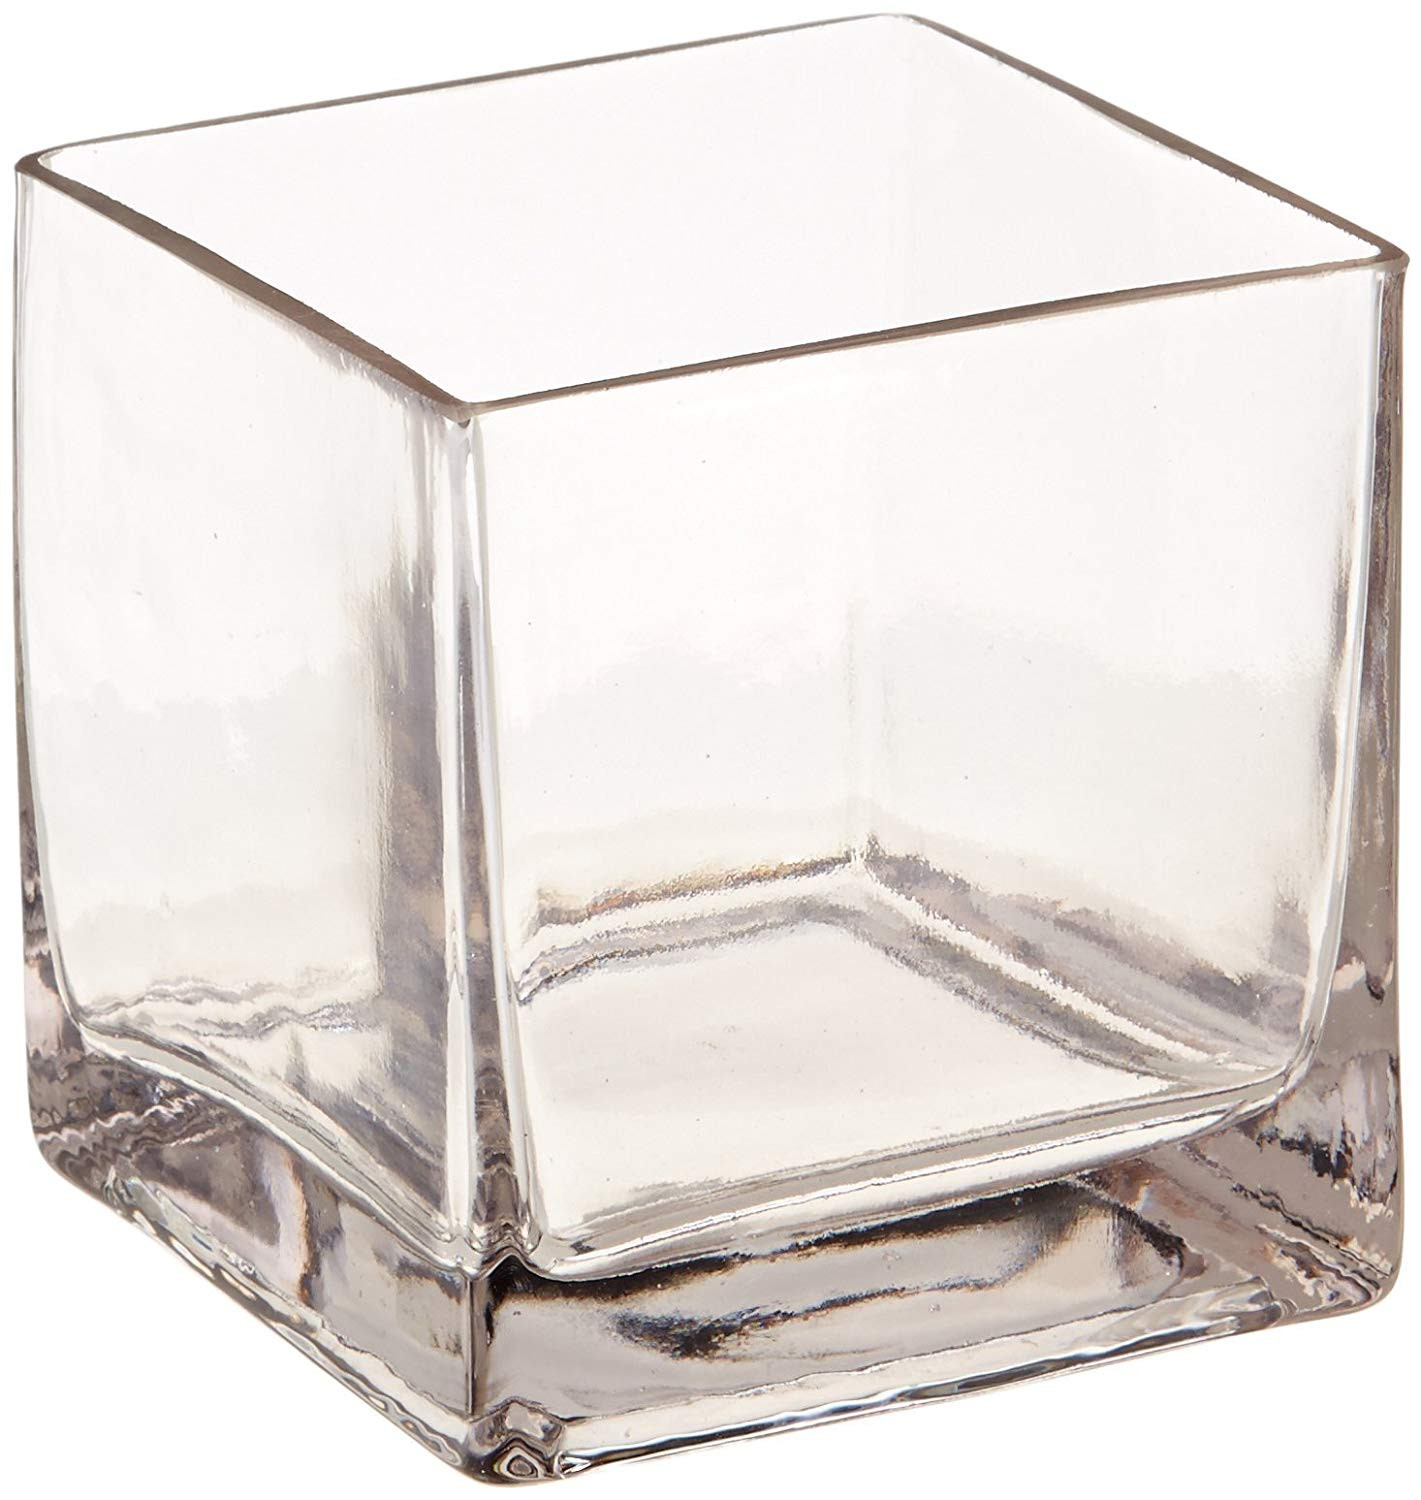 19 Cute Small Square Glass Vases 2024 free download small square glass vases of amazon com 12piece 4 square crystal clear glass vase home kitchen with 71 jezfmvnl sl1500